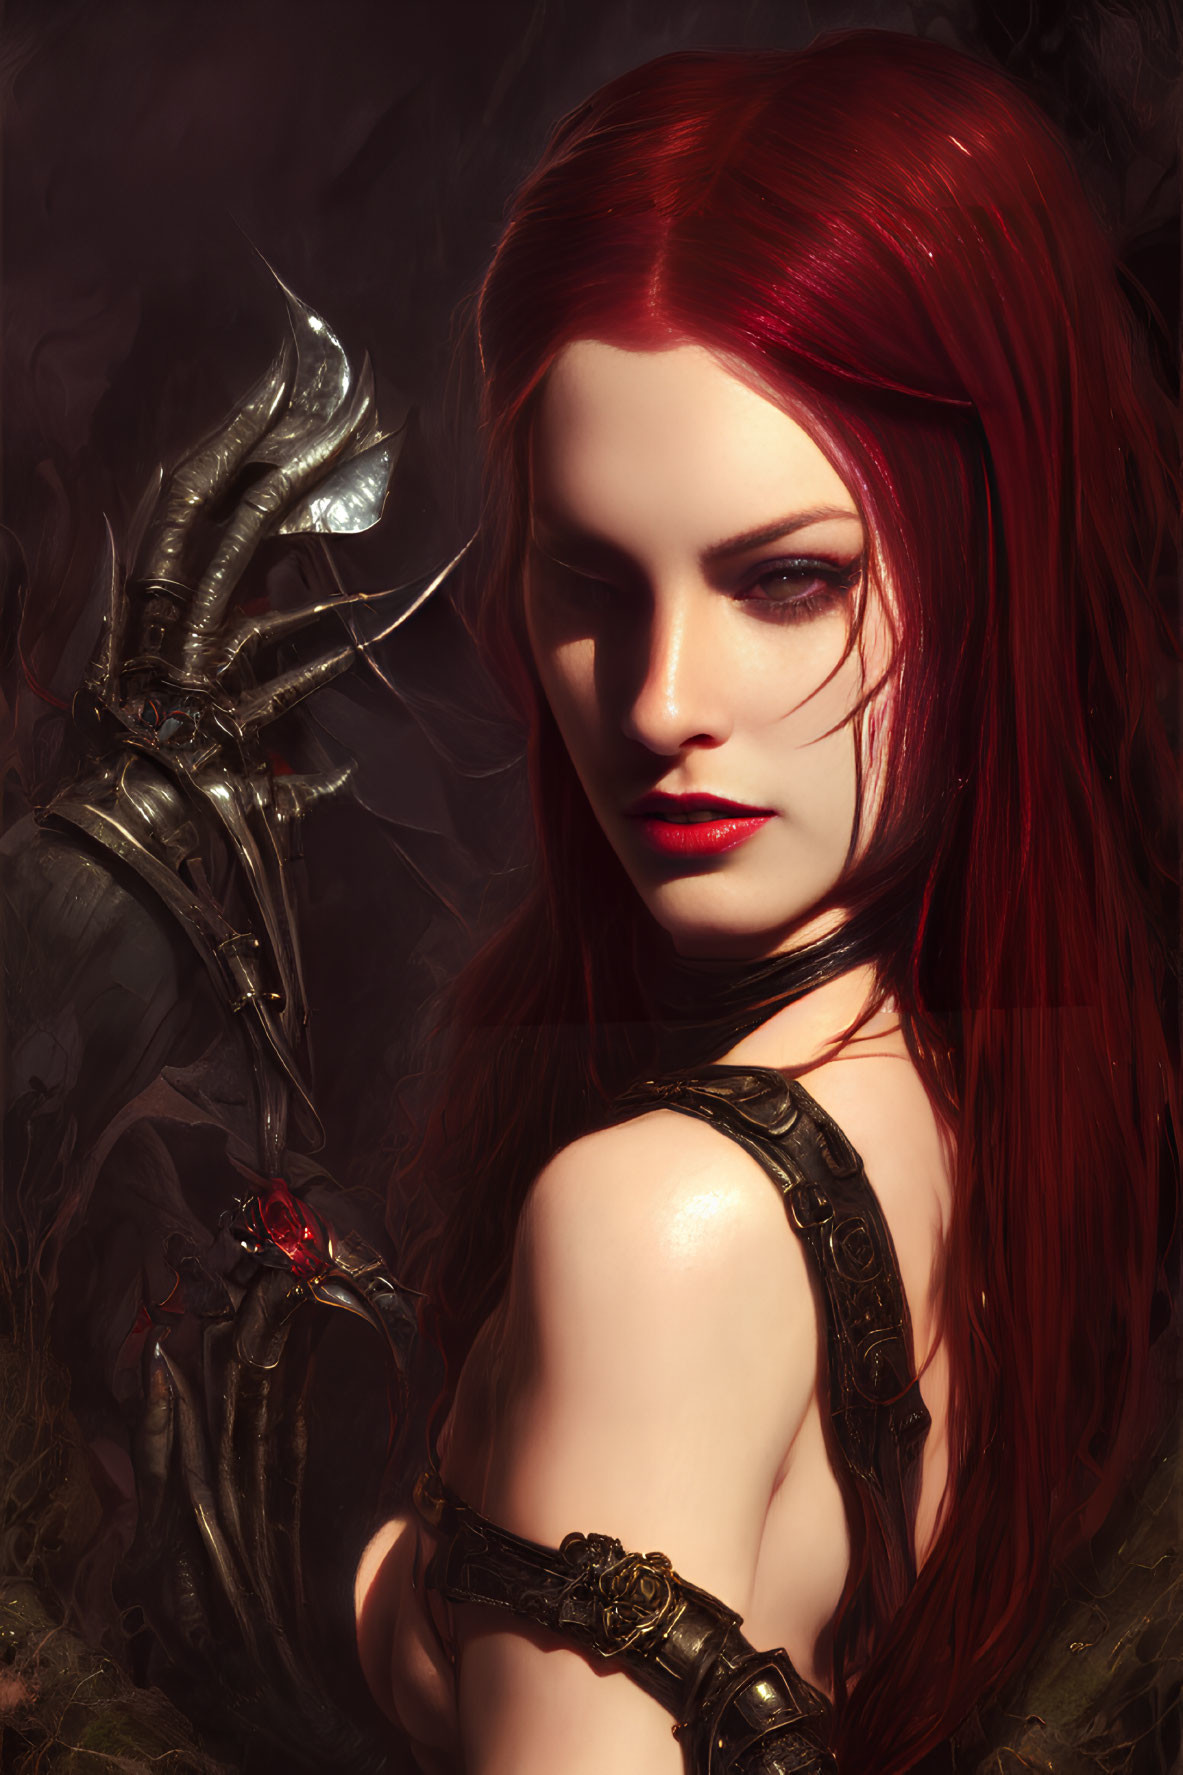 Red-haired woman in mystical warrior armor with striking makeup